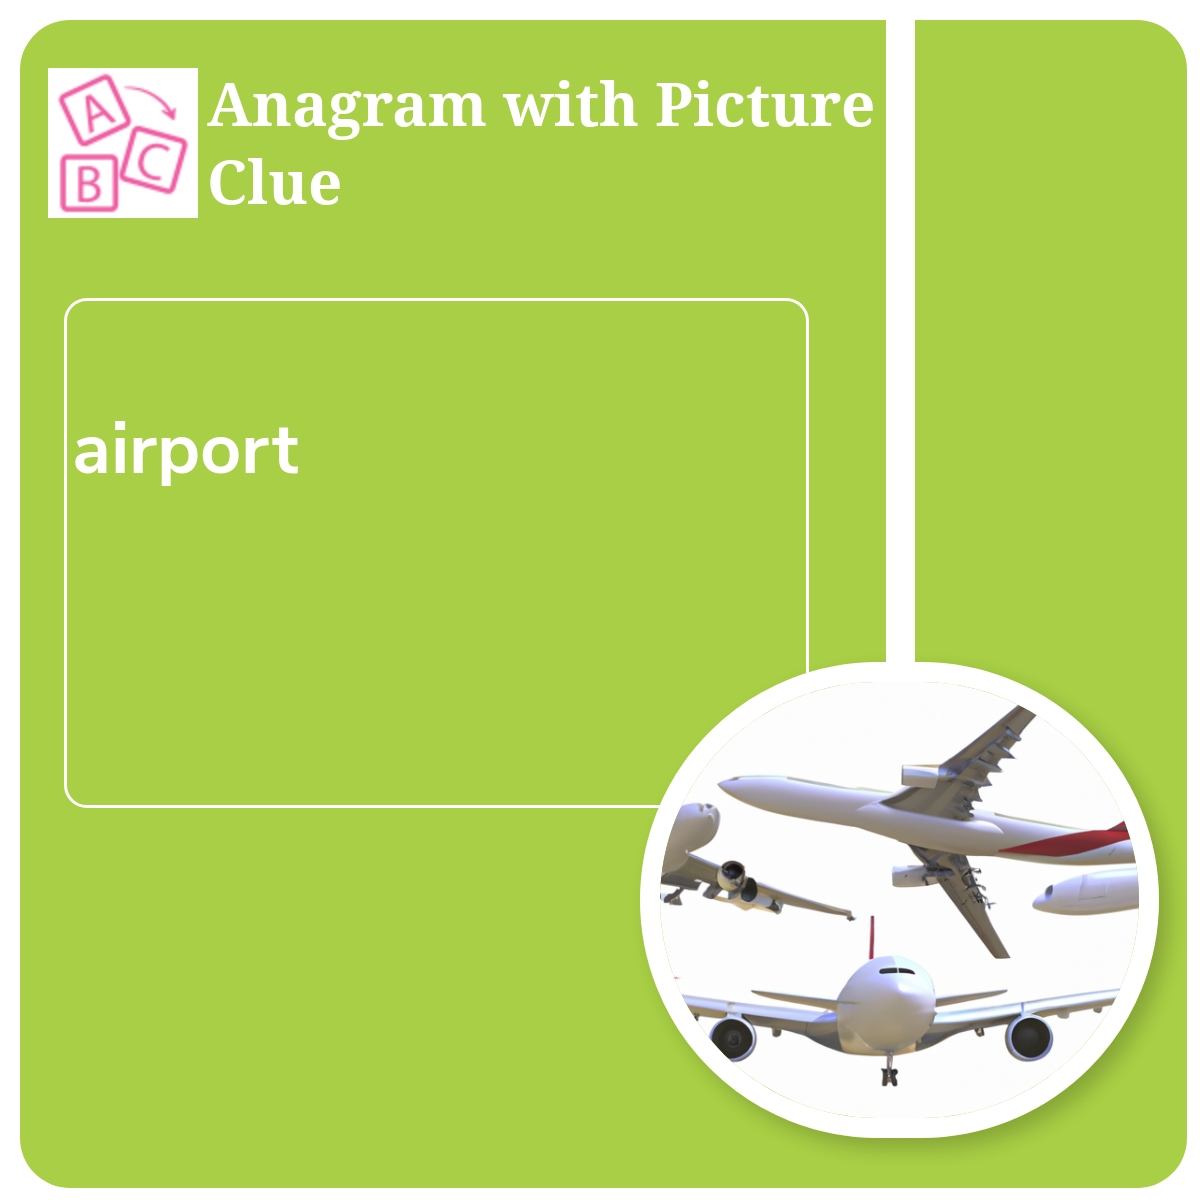 Anagram With Picture Clue: Airport